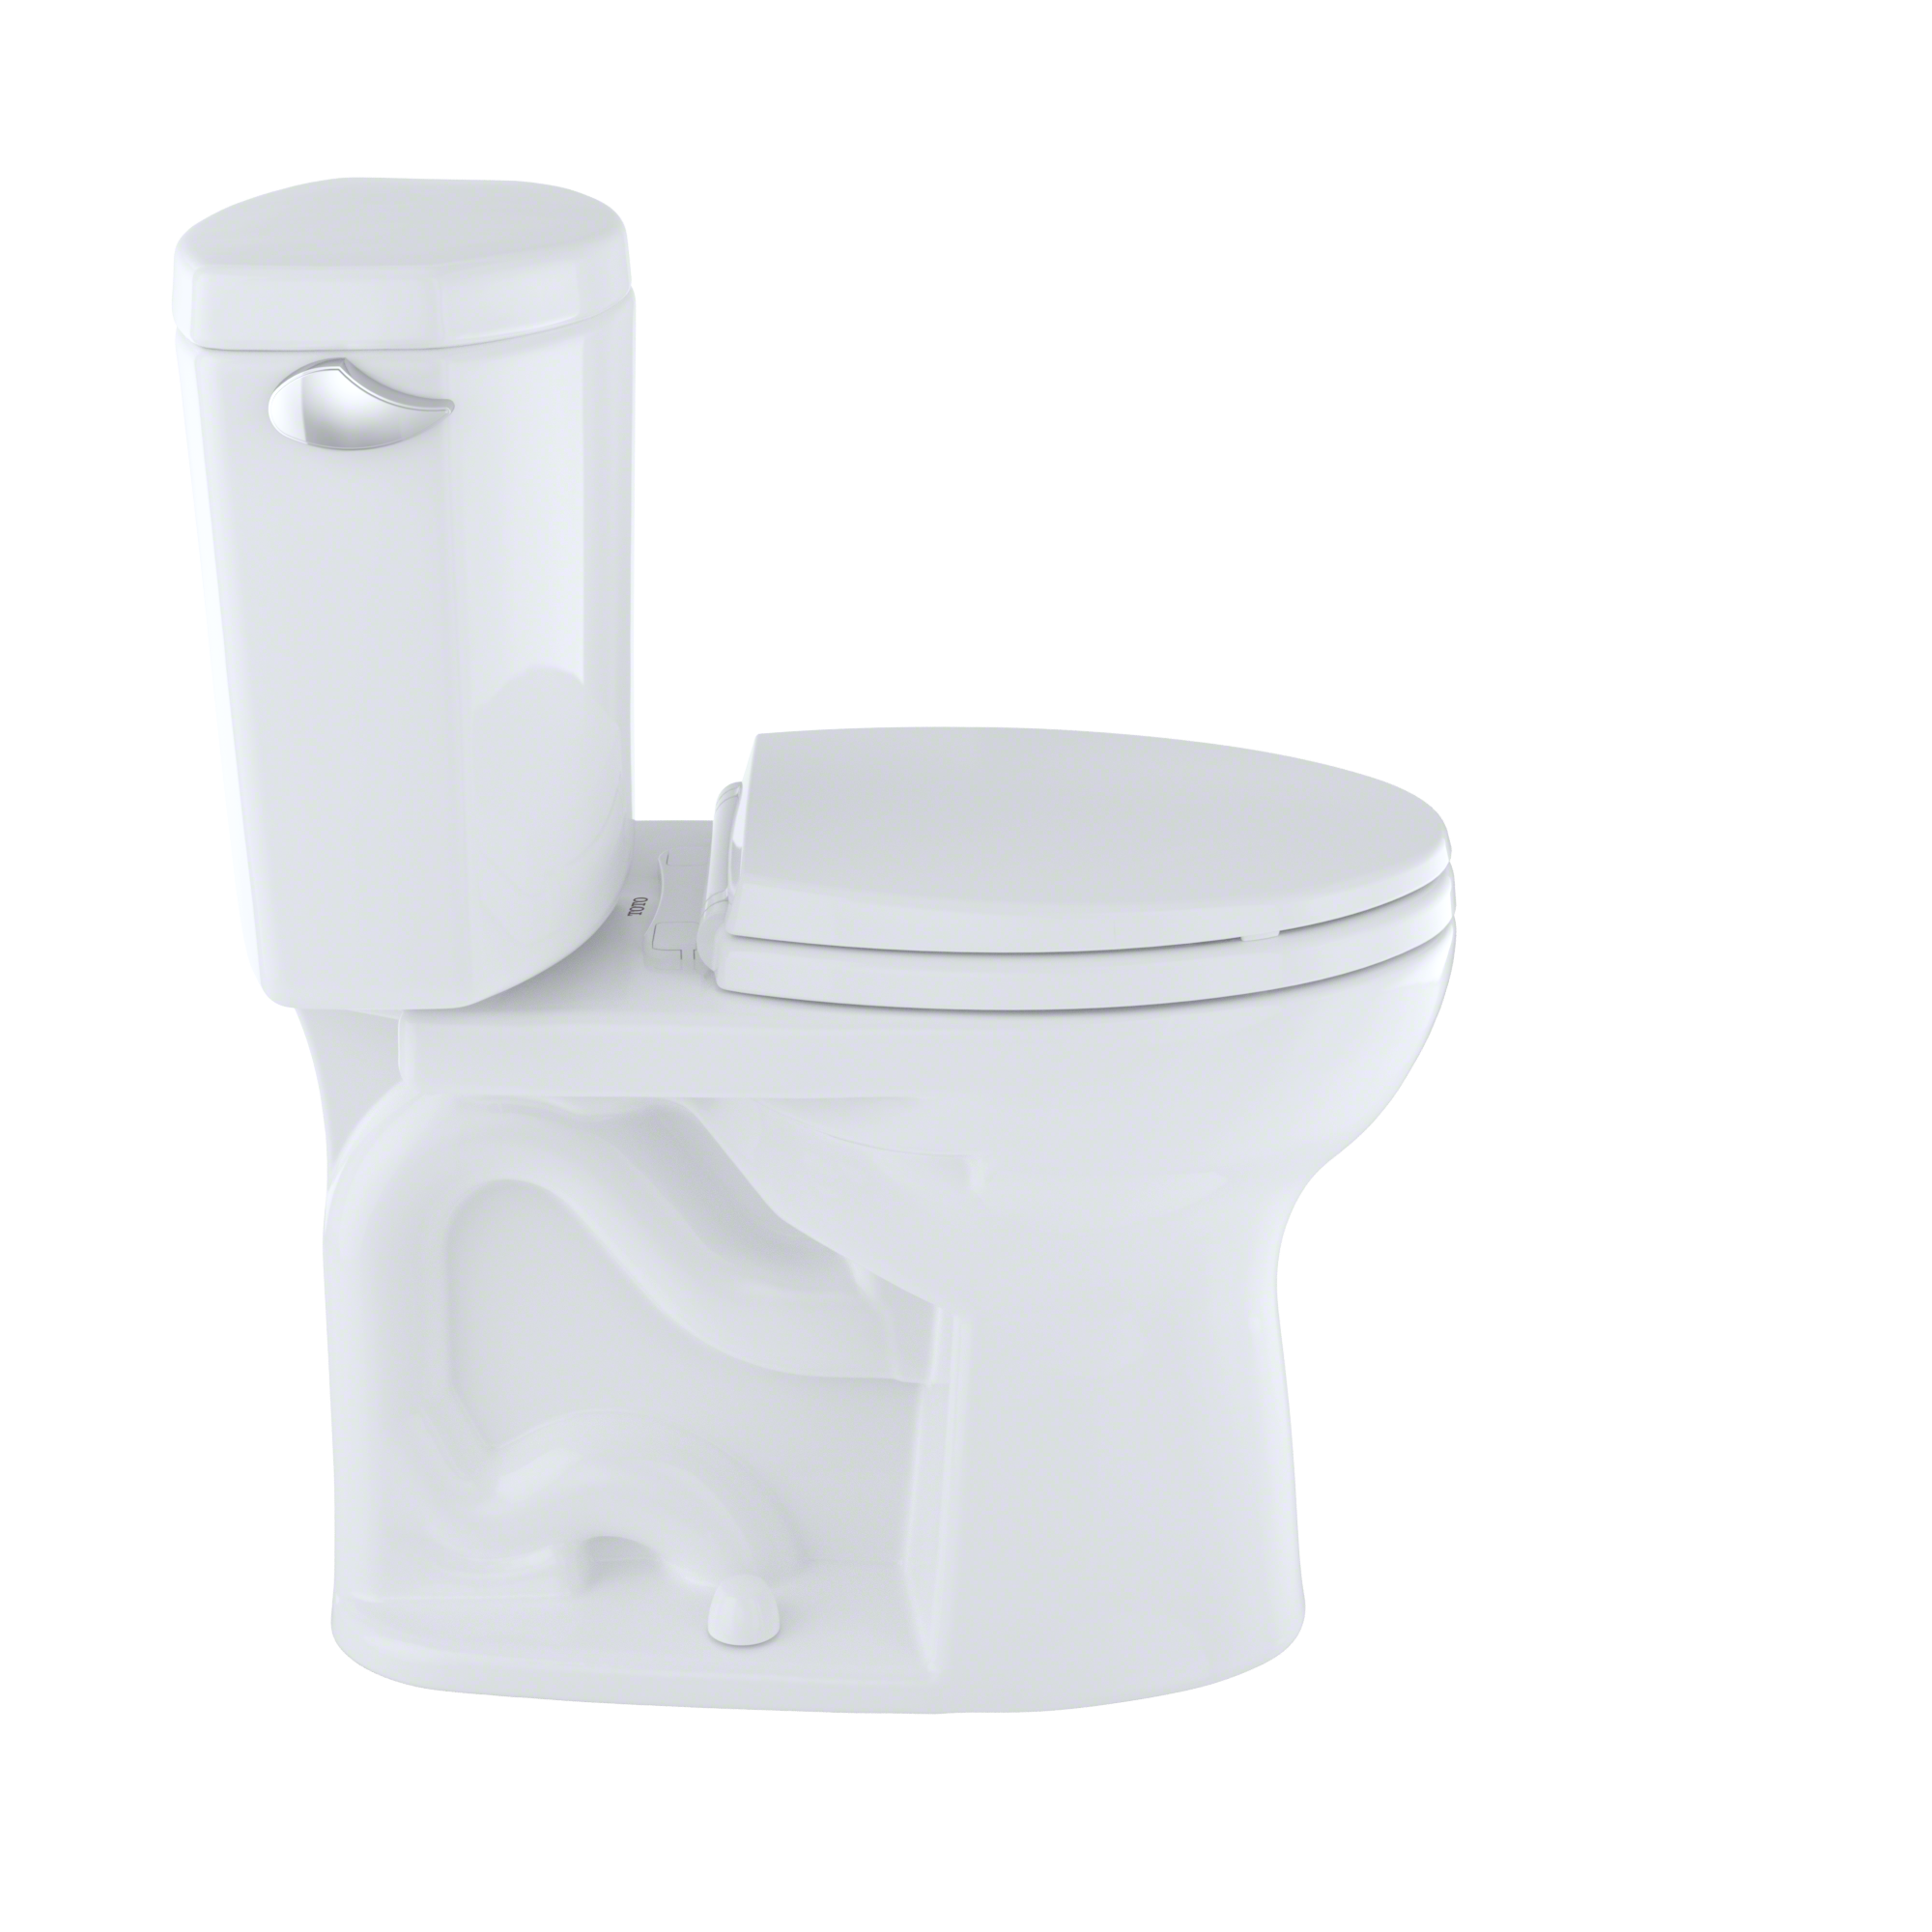 TOTO® Drake® II Two-Piece Round 1.28 GPF Universal Height Toilet with CEFIONTECT, Cotton White - CST453CEFG#01 - image 5 of 5